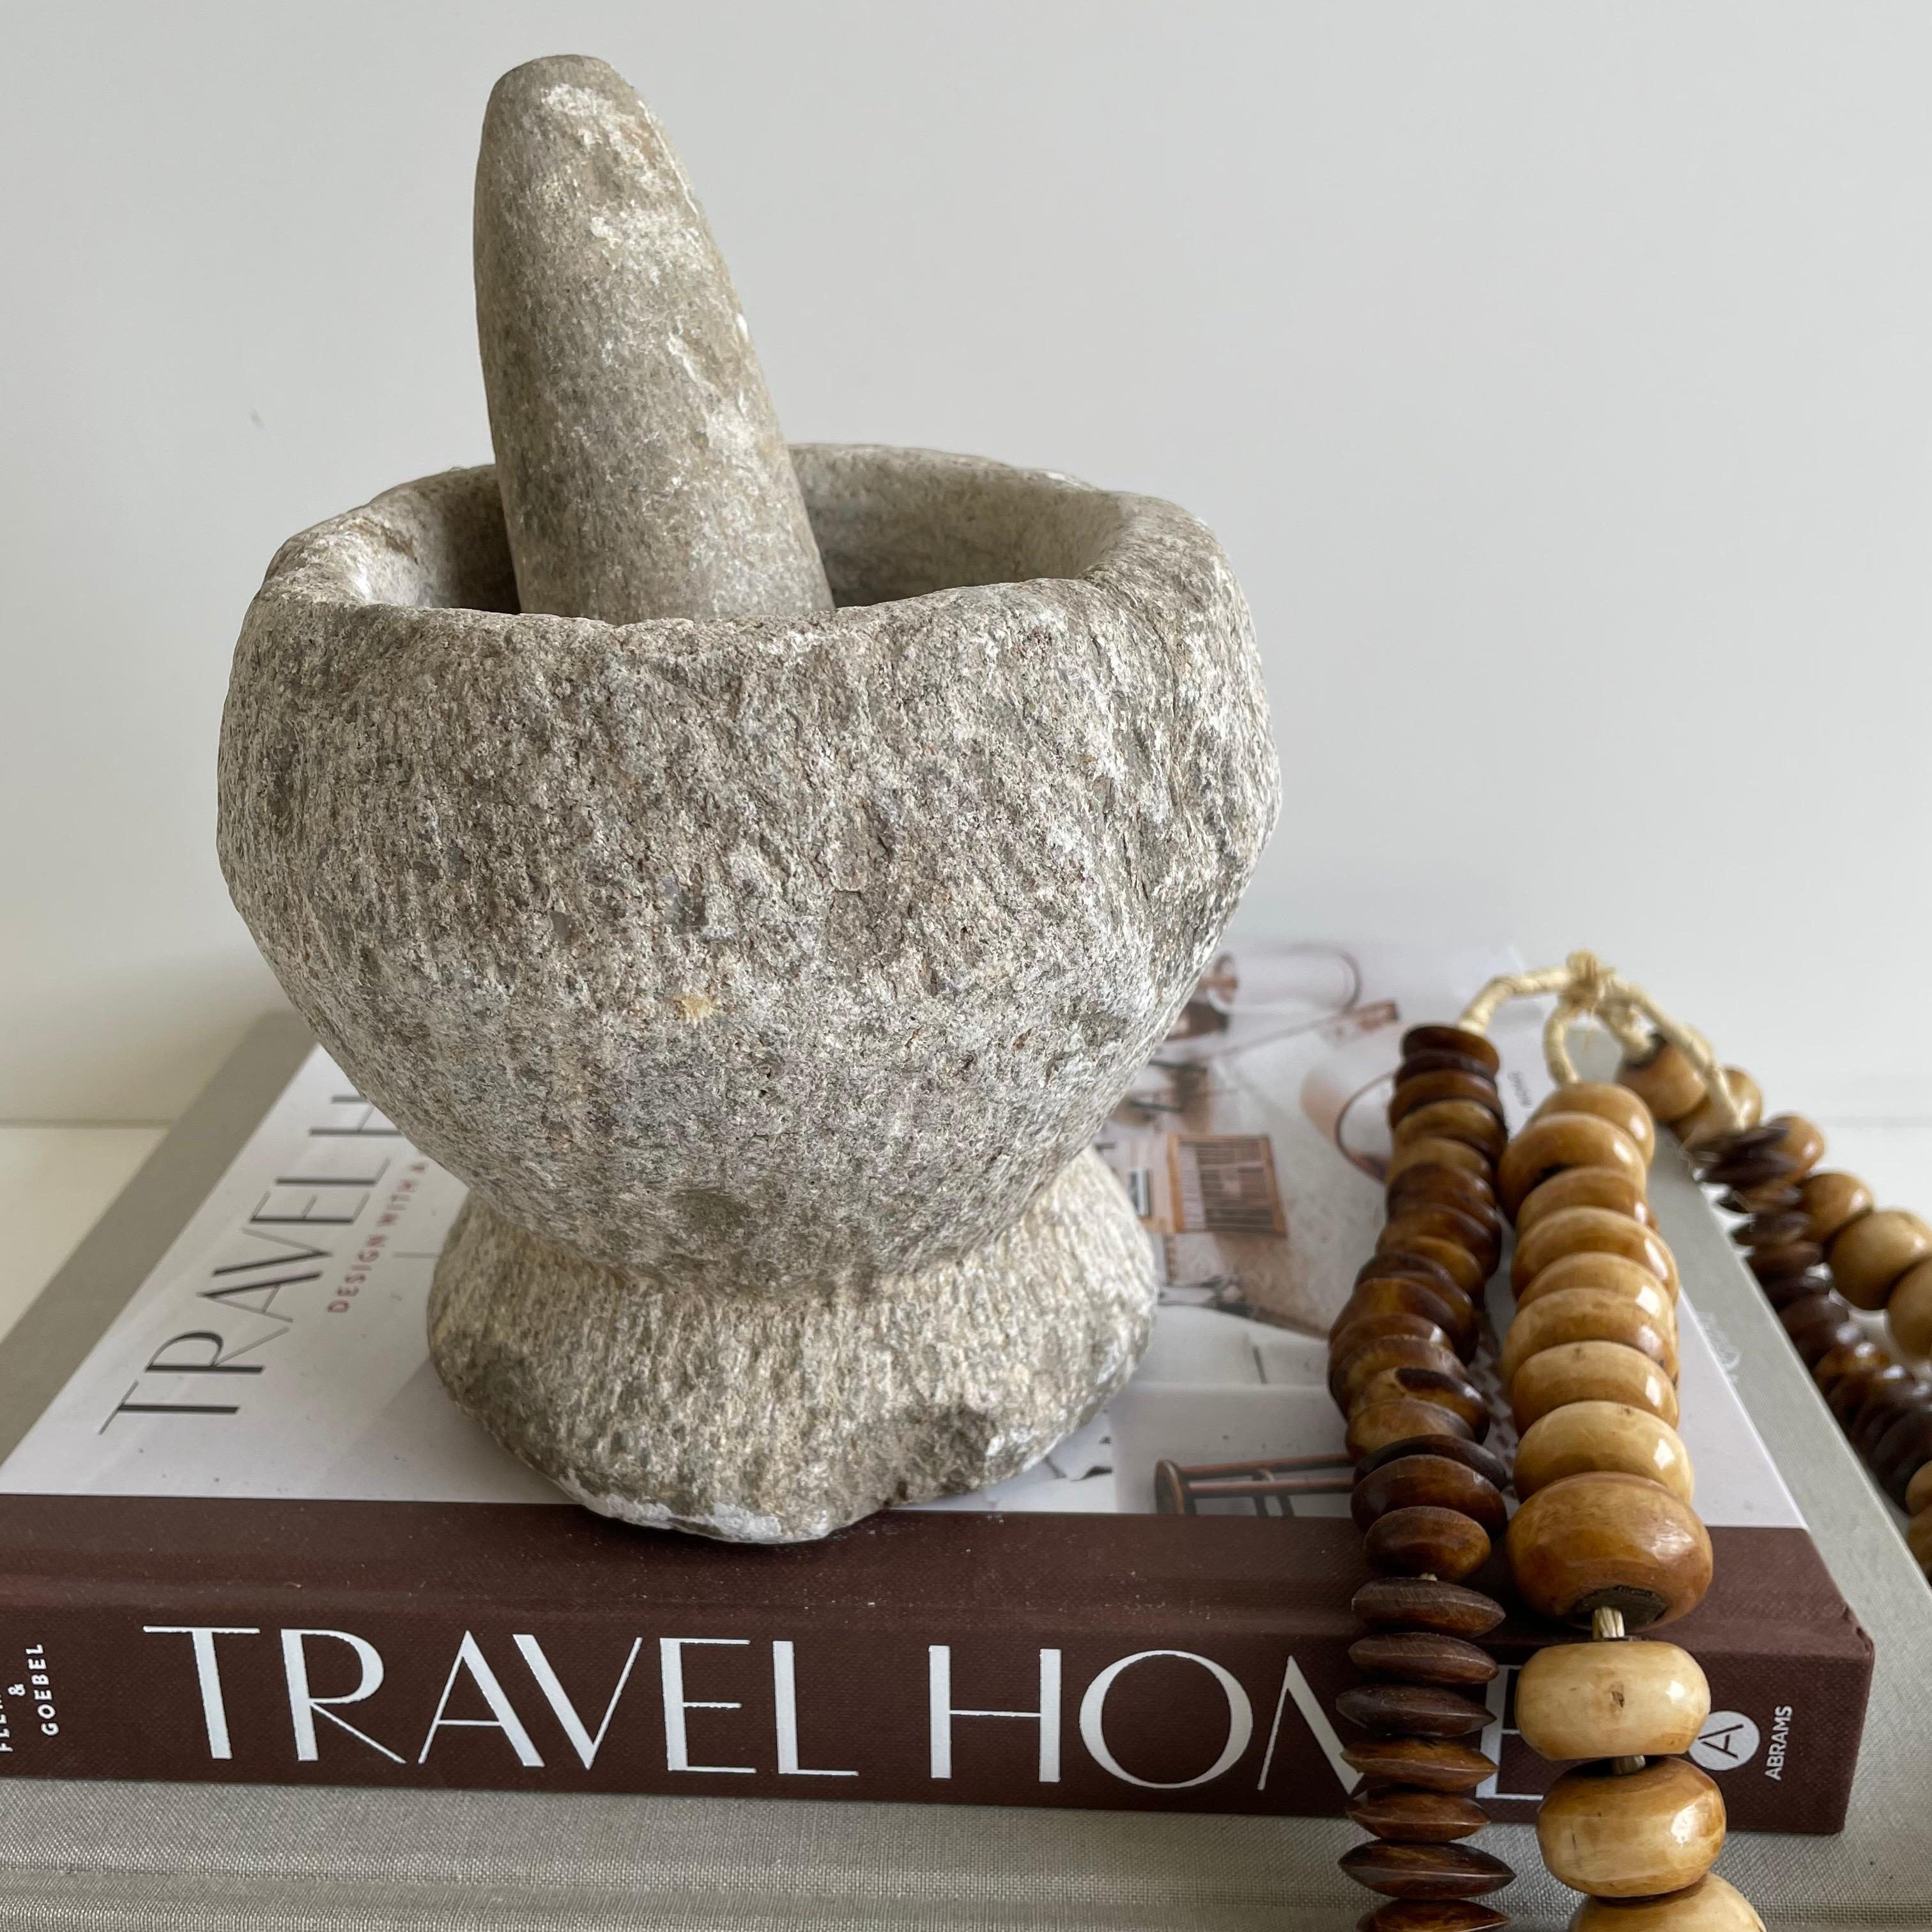 Antique stone mortar and pestle bowl set, great decorative item, or can be used.
Accessories not included
Size: 7.5 x 7.5 x 6
weight 10lbs.